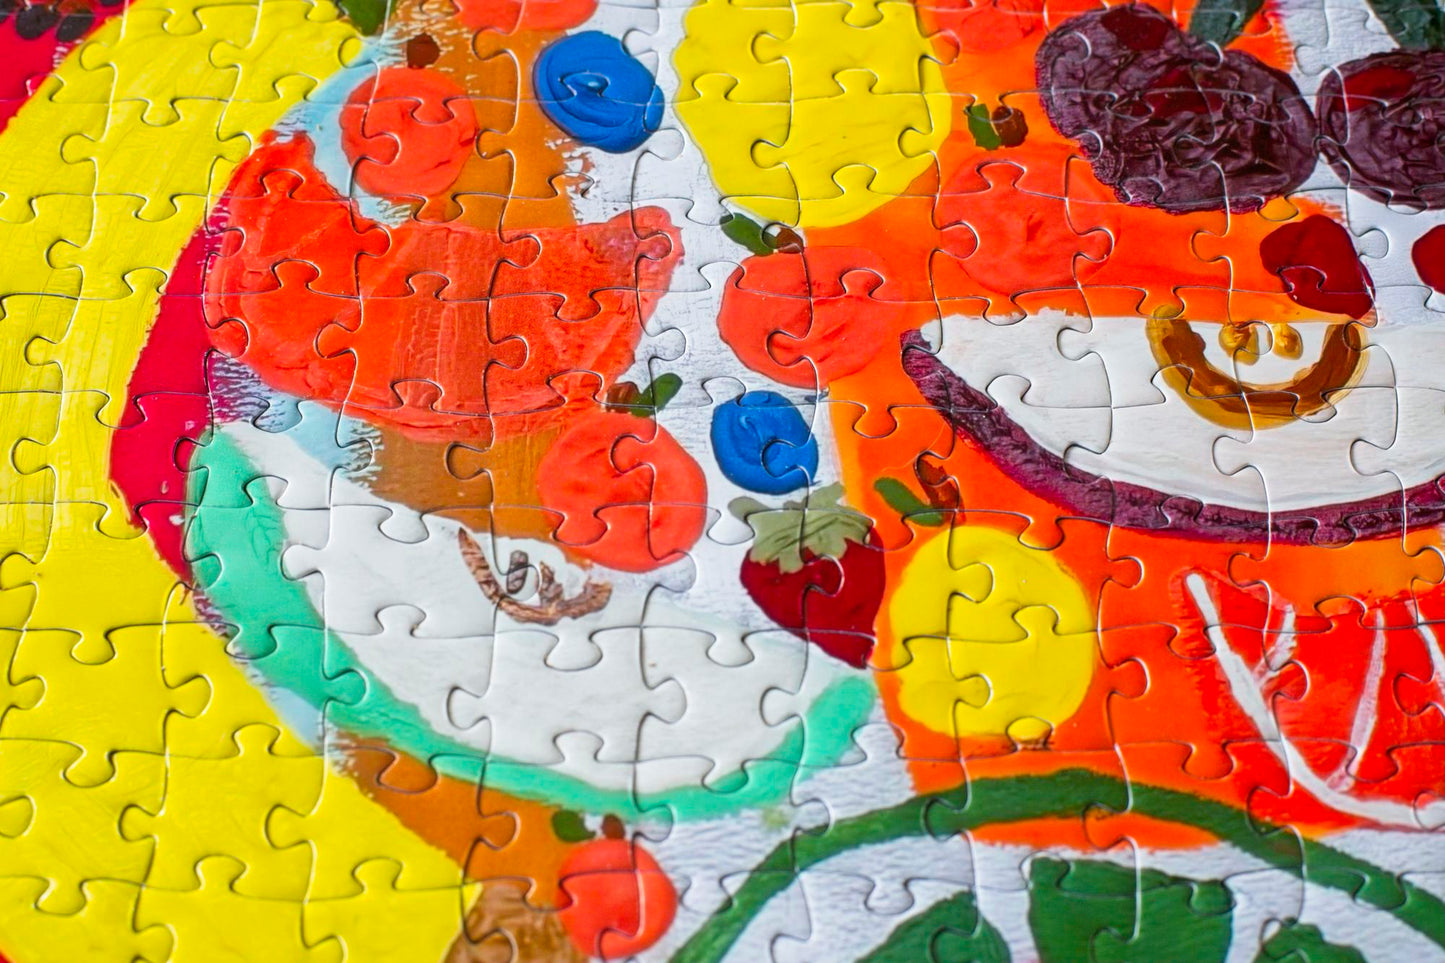 A variety of fruit pieces depicted in a section of a colorful jigsaw puzzle